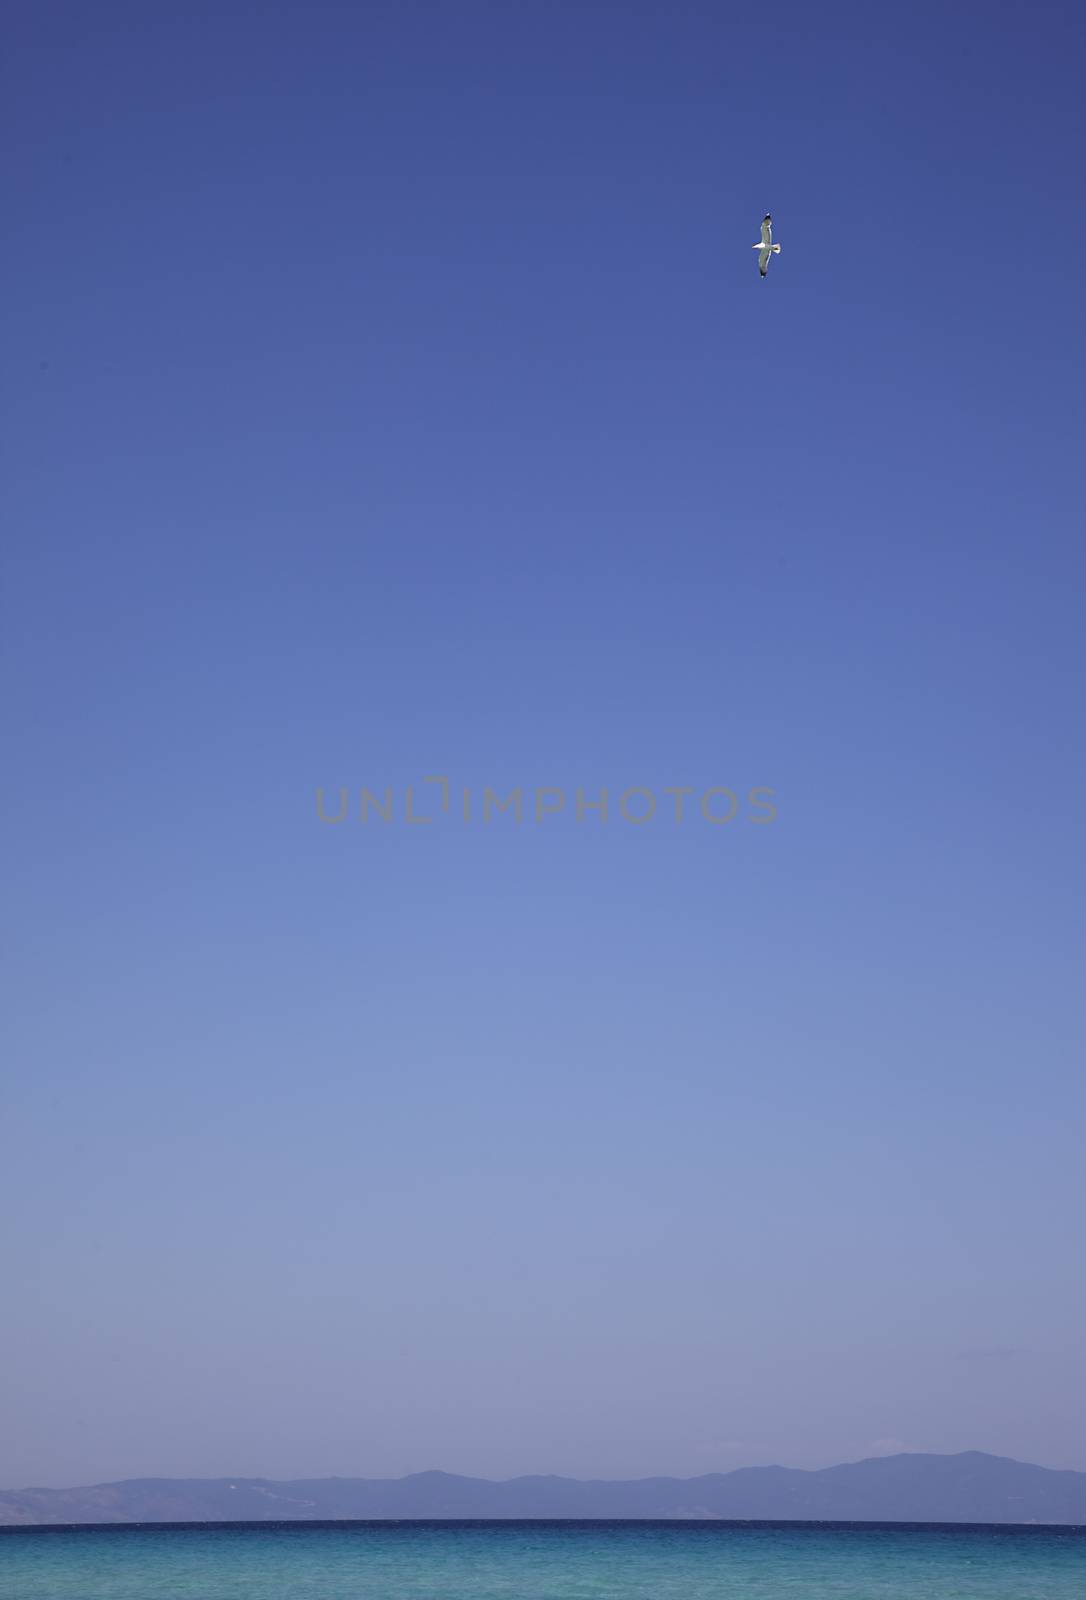 A lonely seagull on a clear sky over sea or ocean waters.